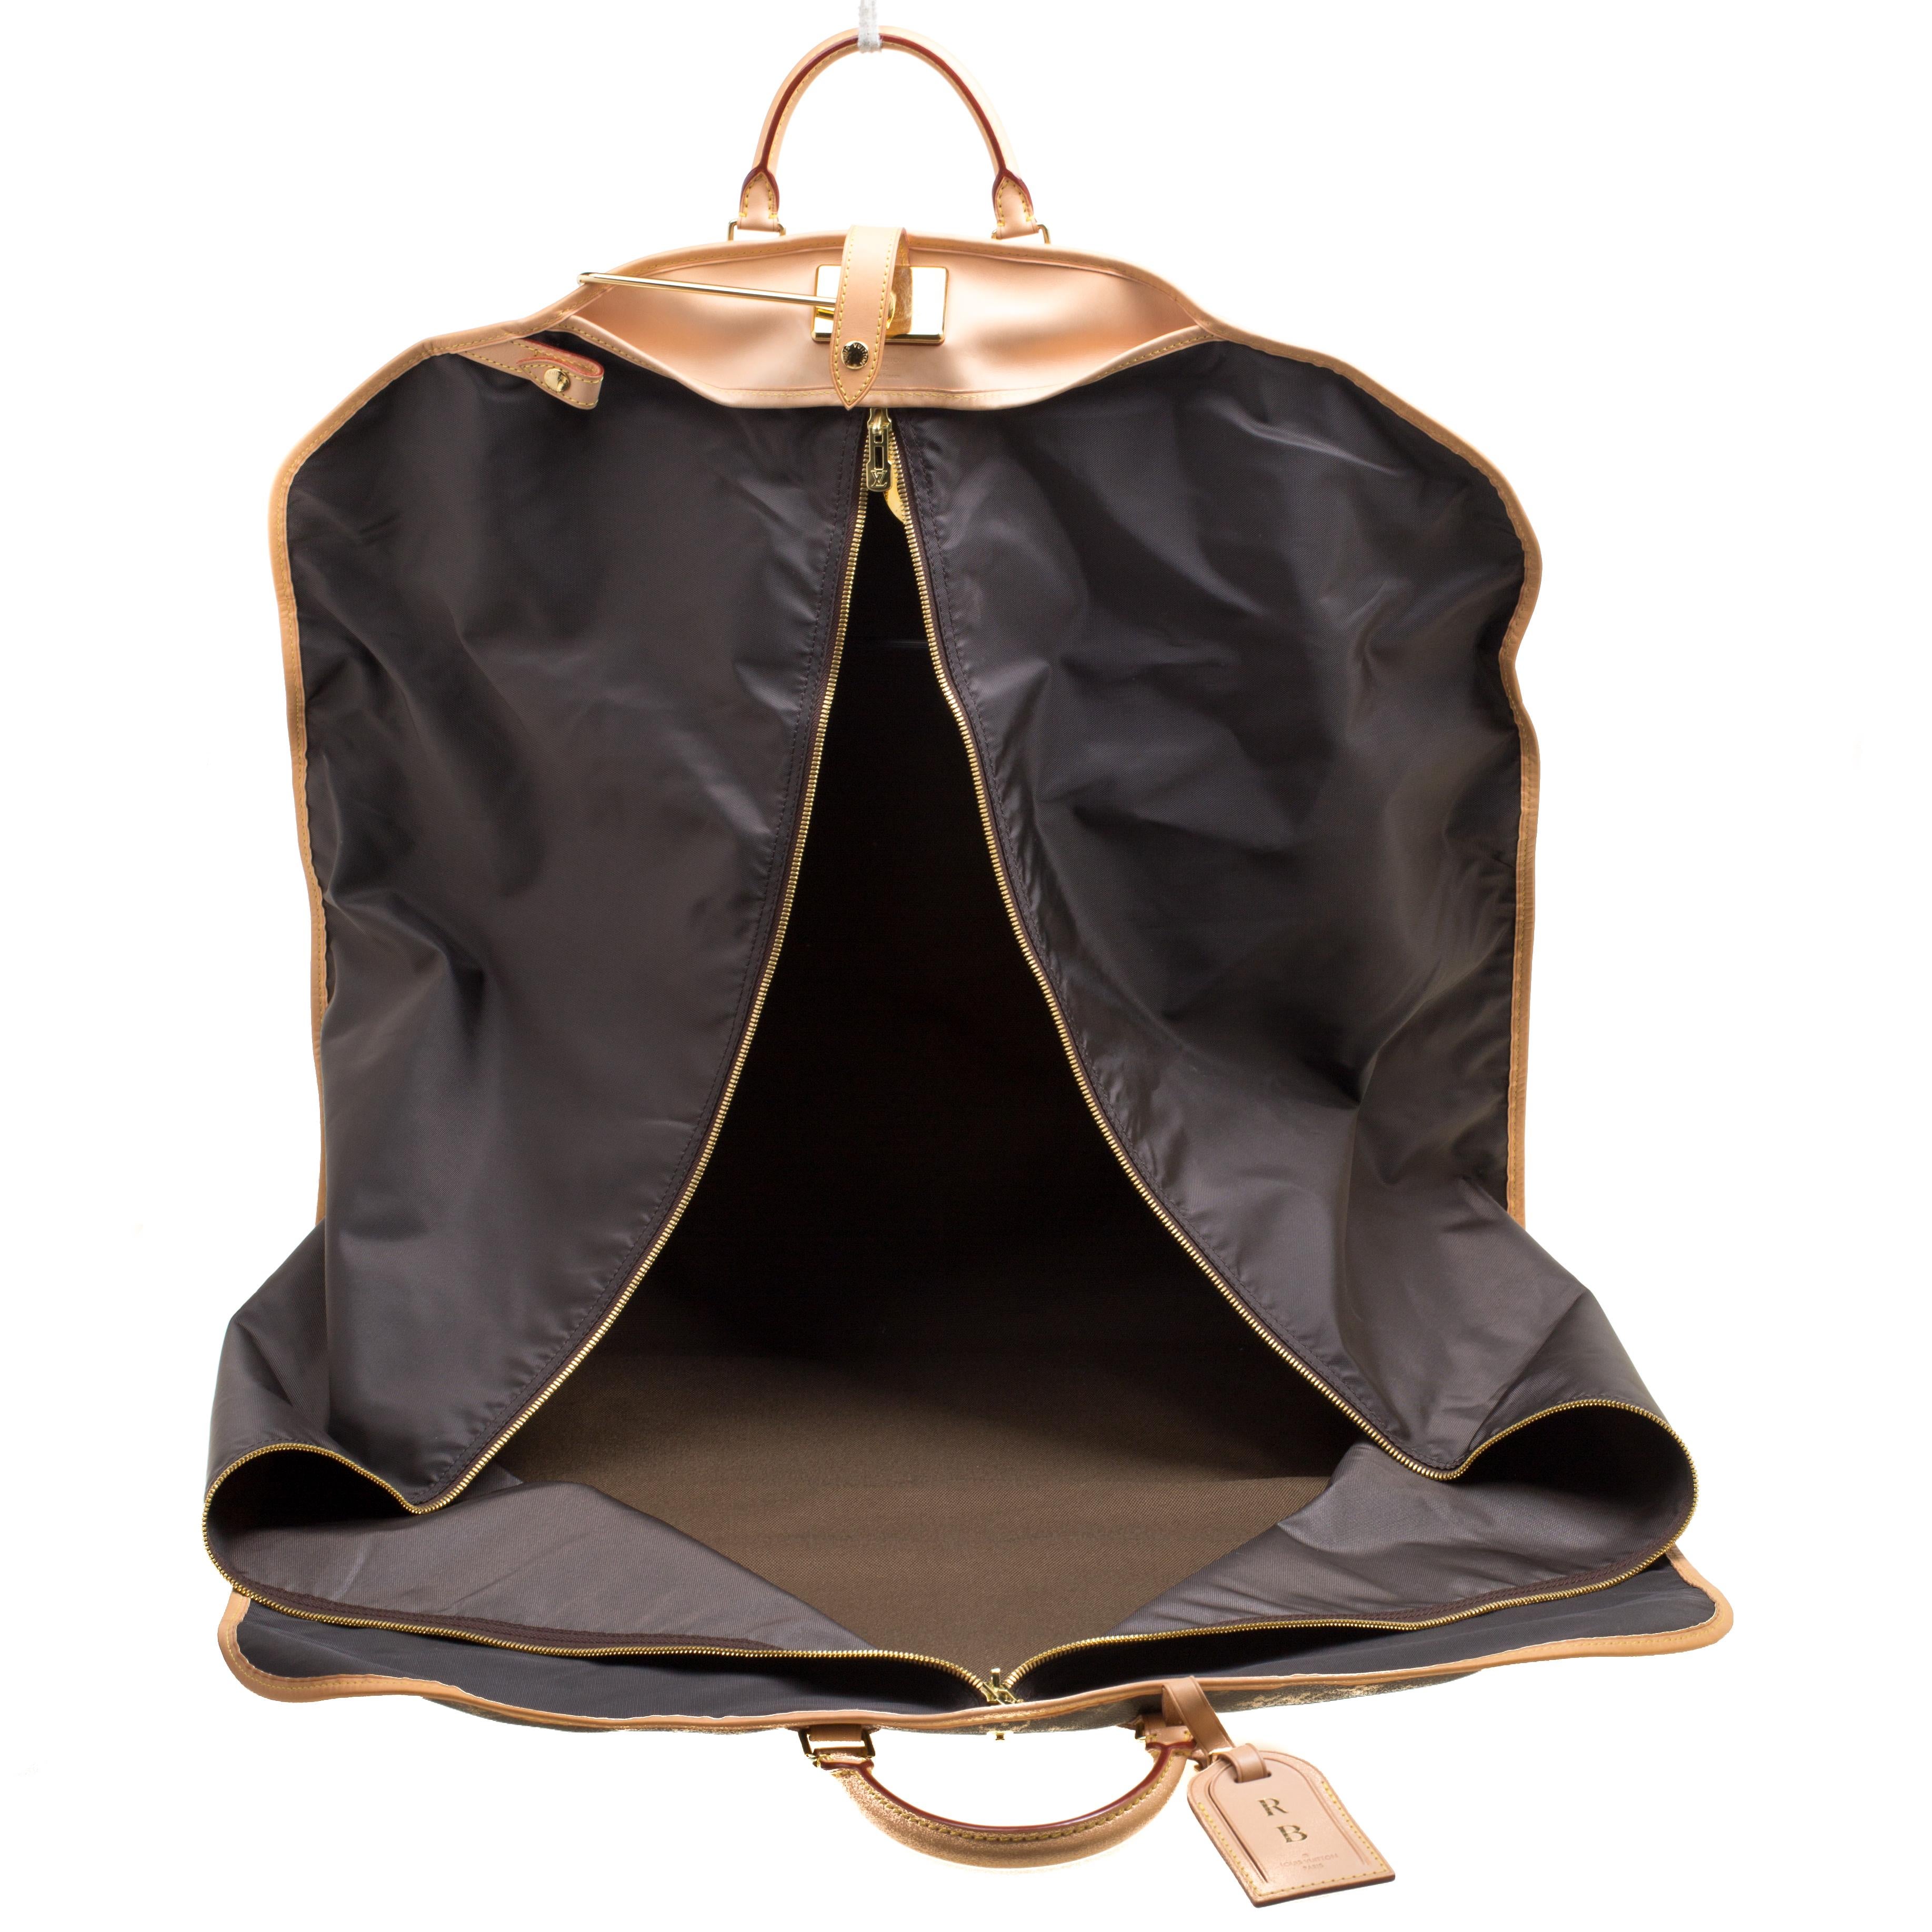 Louis Vuitton assists you in making travel easy by extending this stylish and super functional garment cover. A blessing for jet-setting people, the cover is crafted from the signature monogram coated canvas along with leather trims. The cover